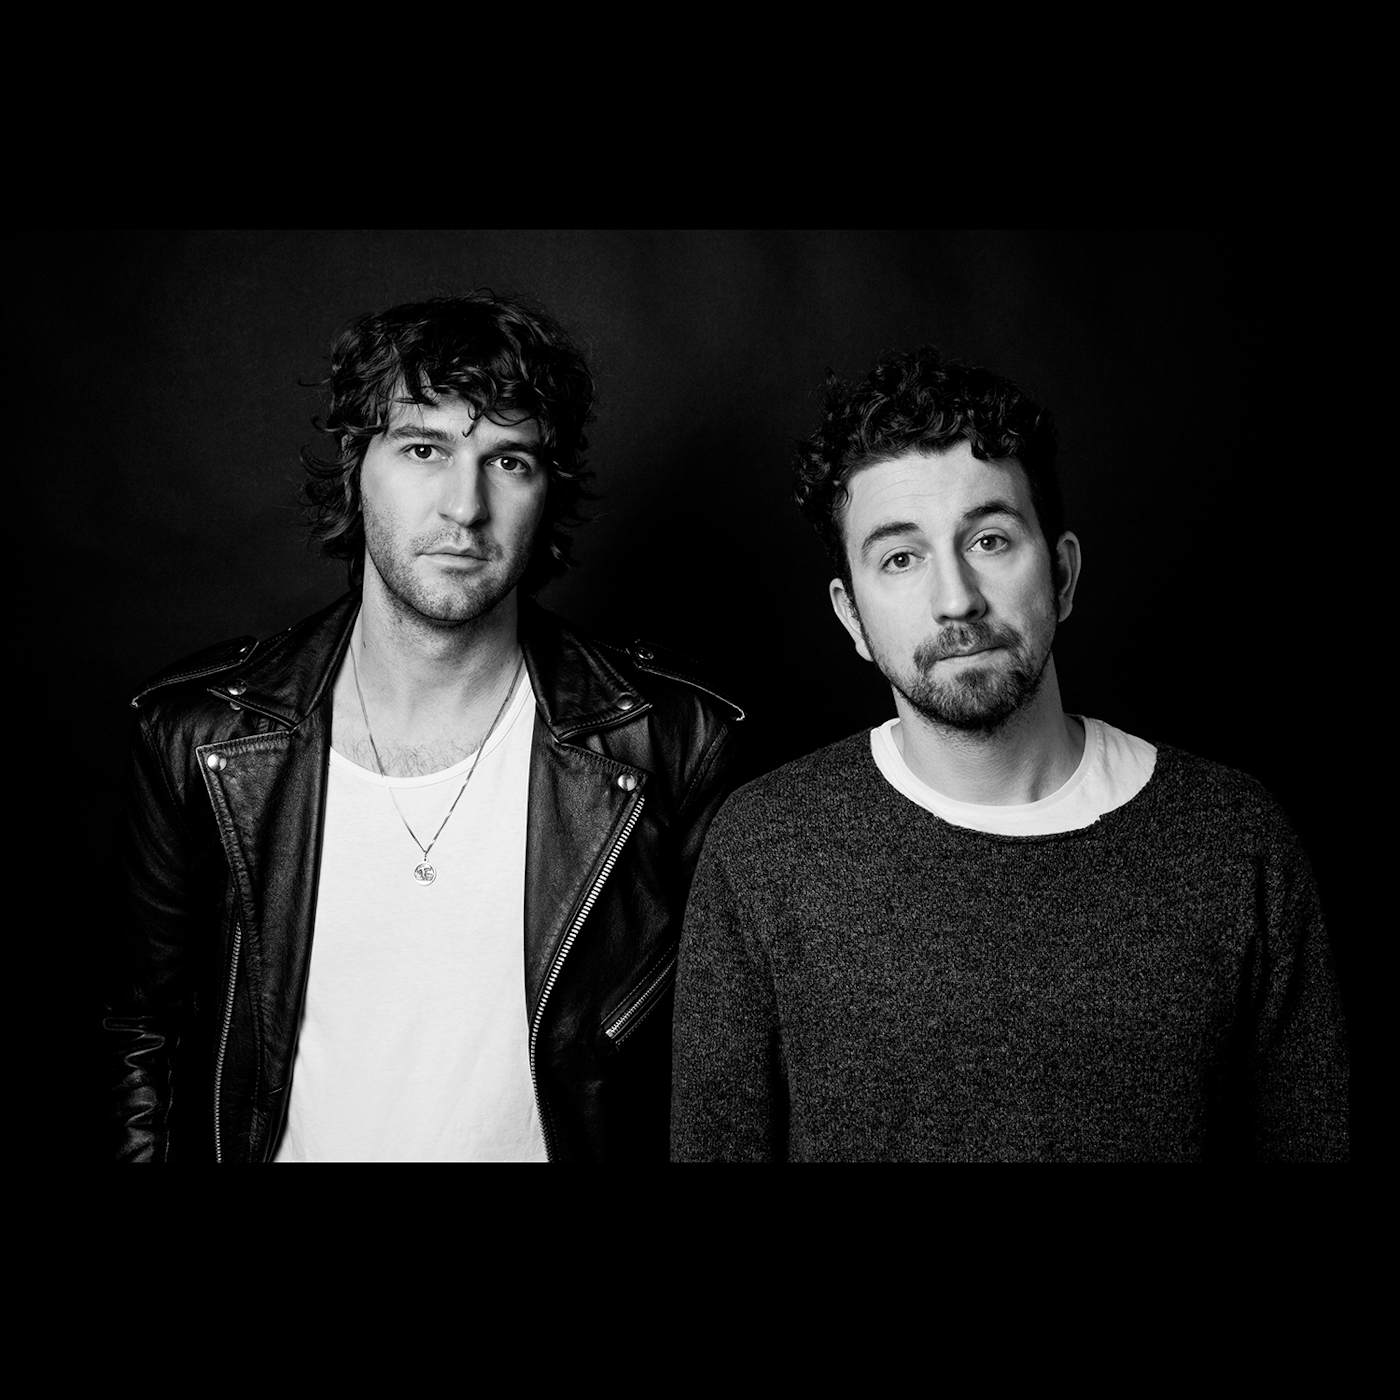 Japandroids NEAR TO THE WILD HEART OF LIFE CD